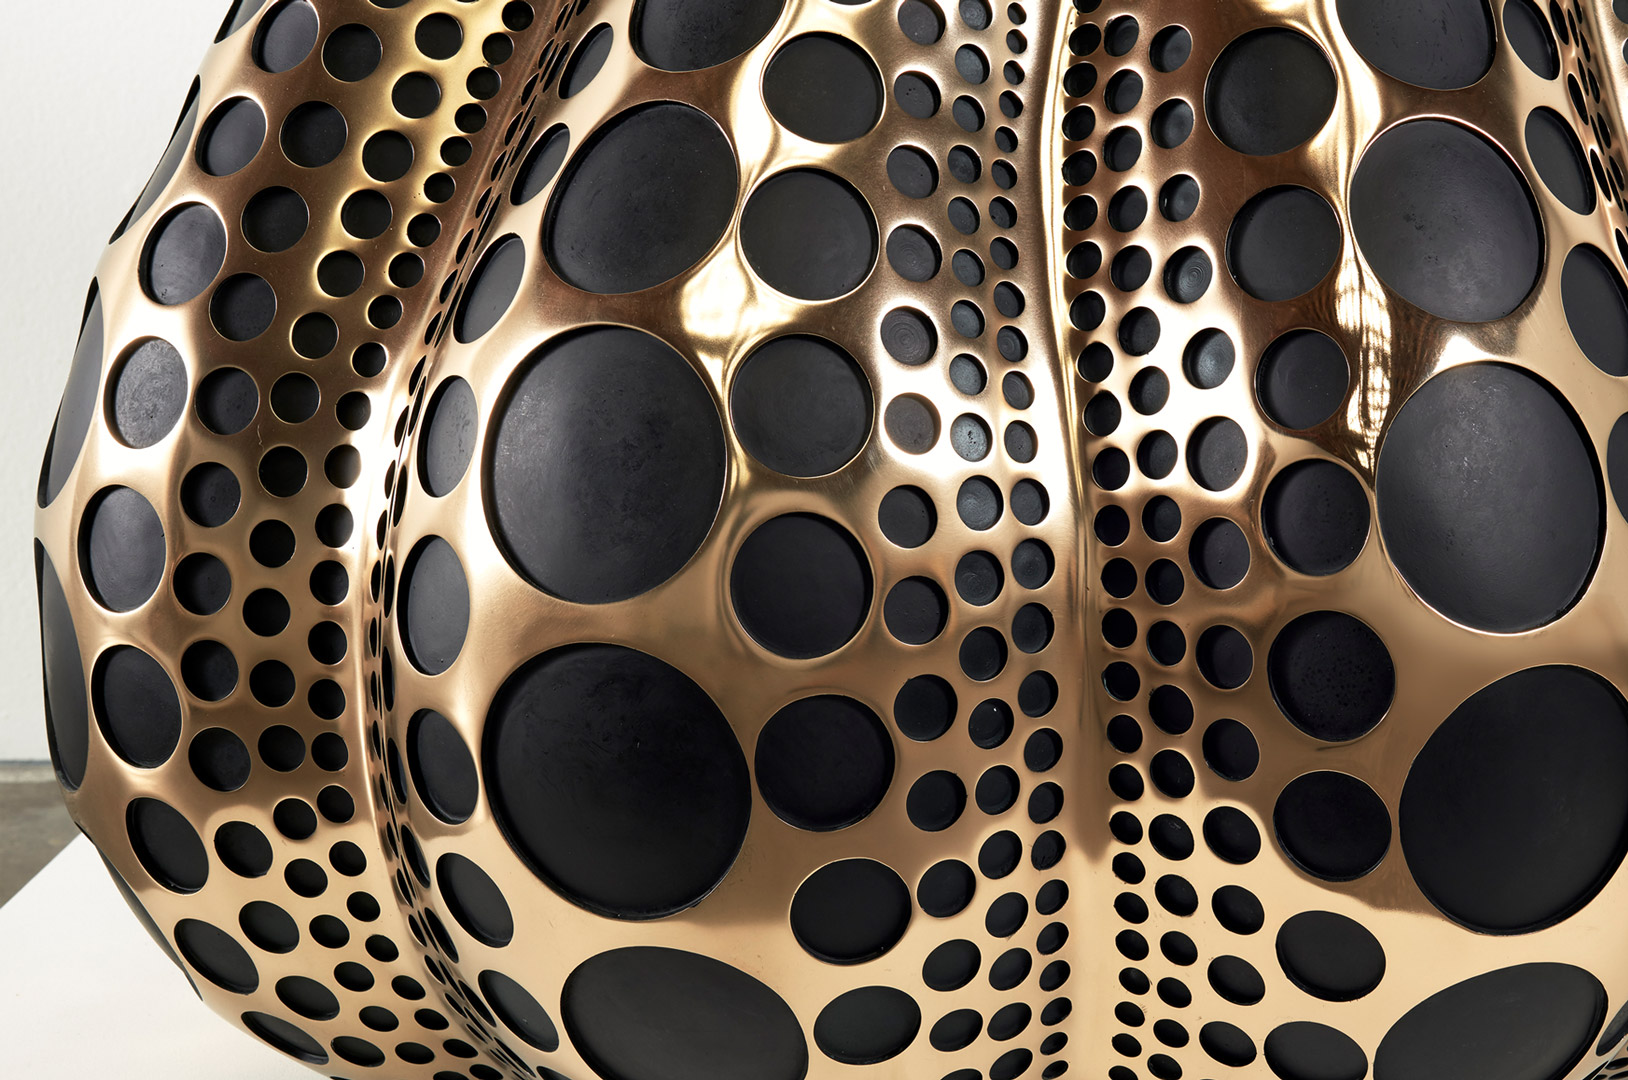 A detail view of a mirror polished bronze, dye, and acrylic lacquer sculpture by Yayoi Kusama, titled Pumpkin (M), dated 2016.